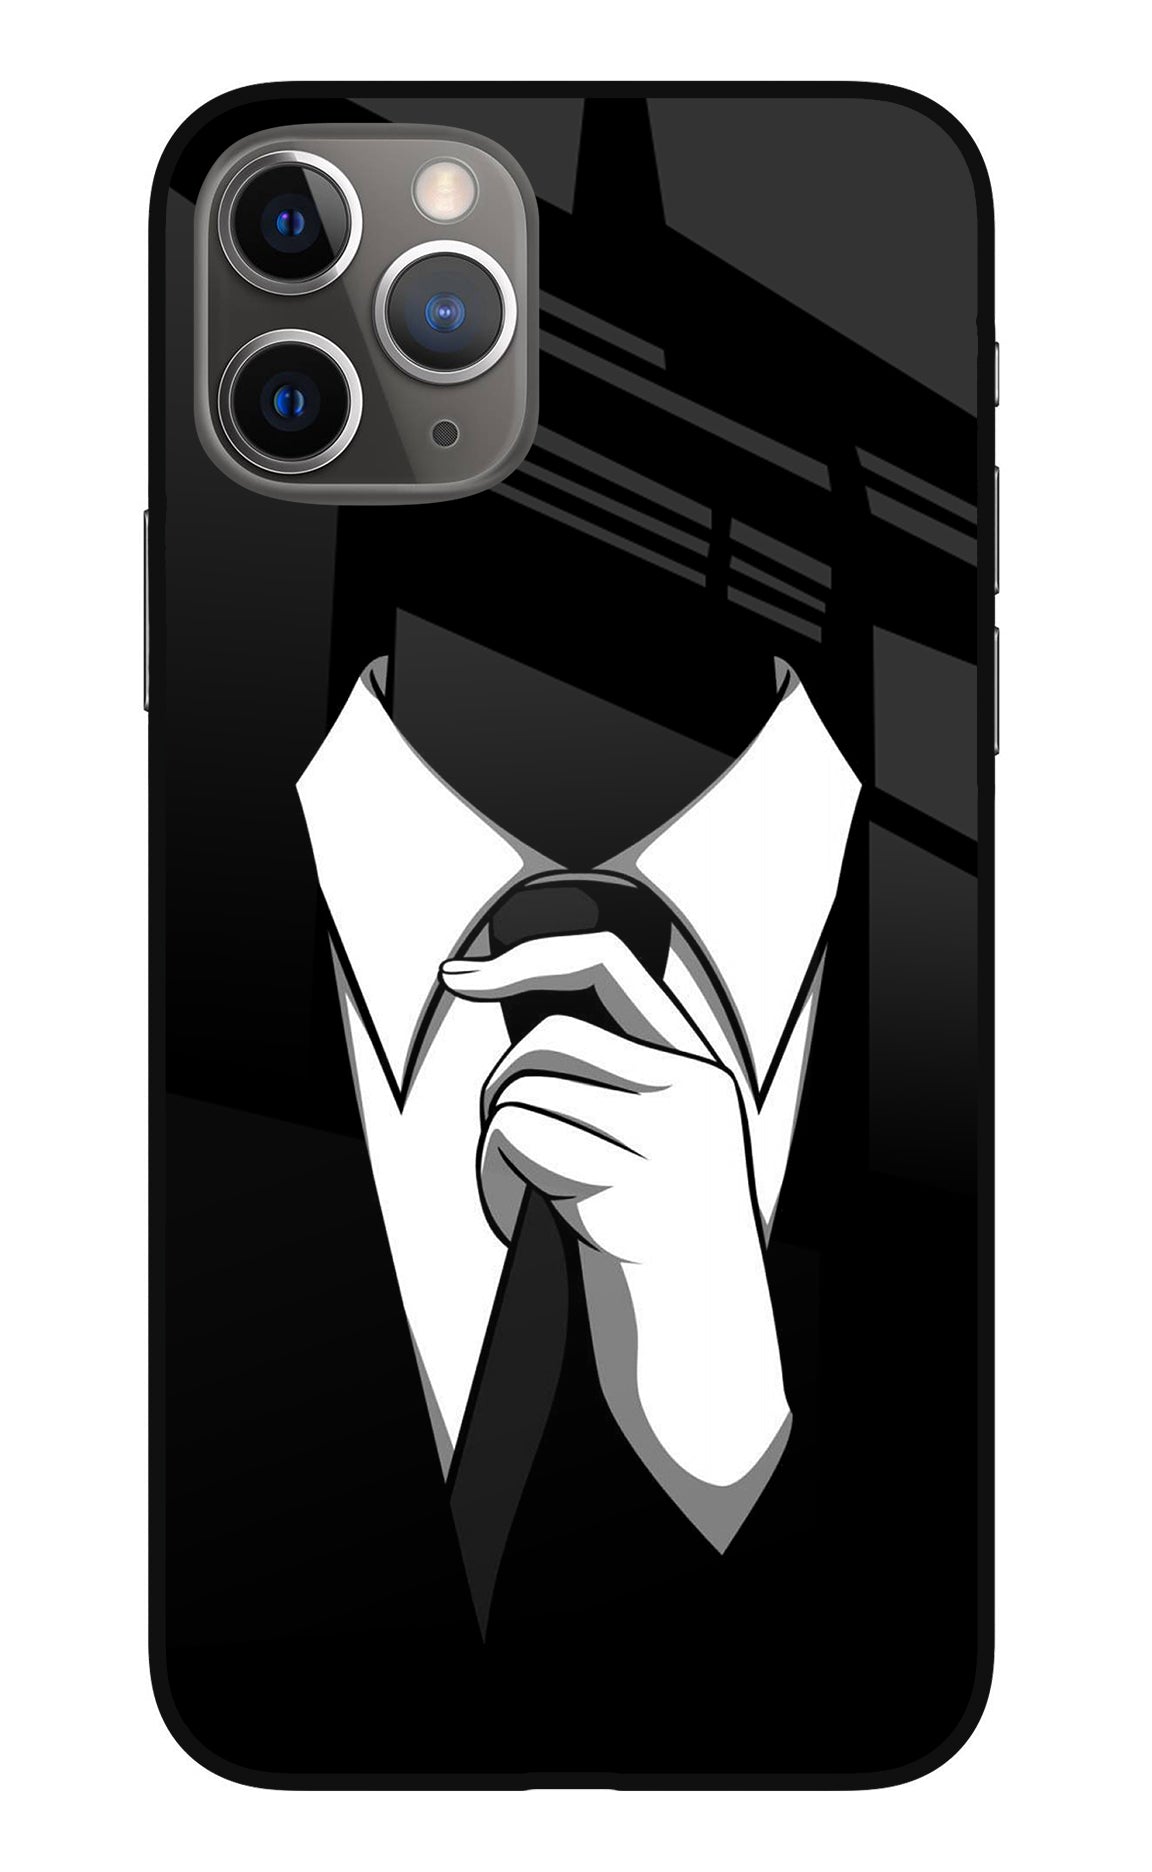 Black Tie iPhone 11 Pro Max Back Cover